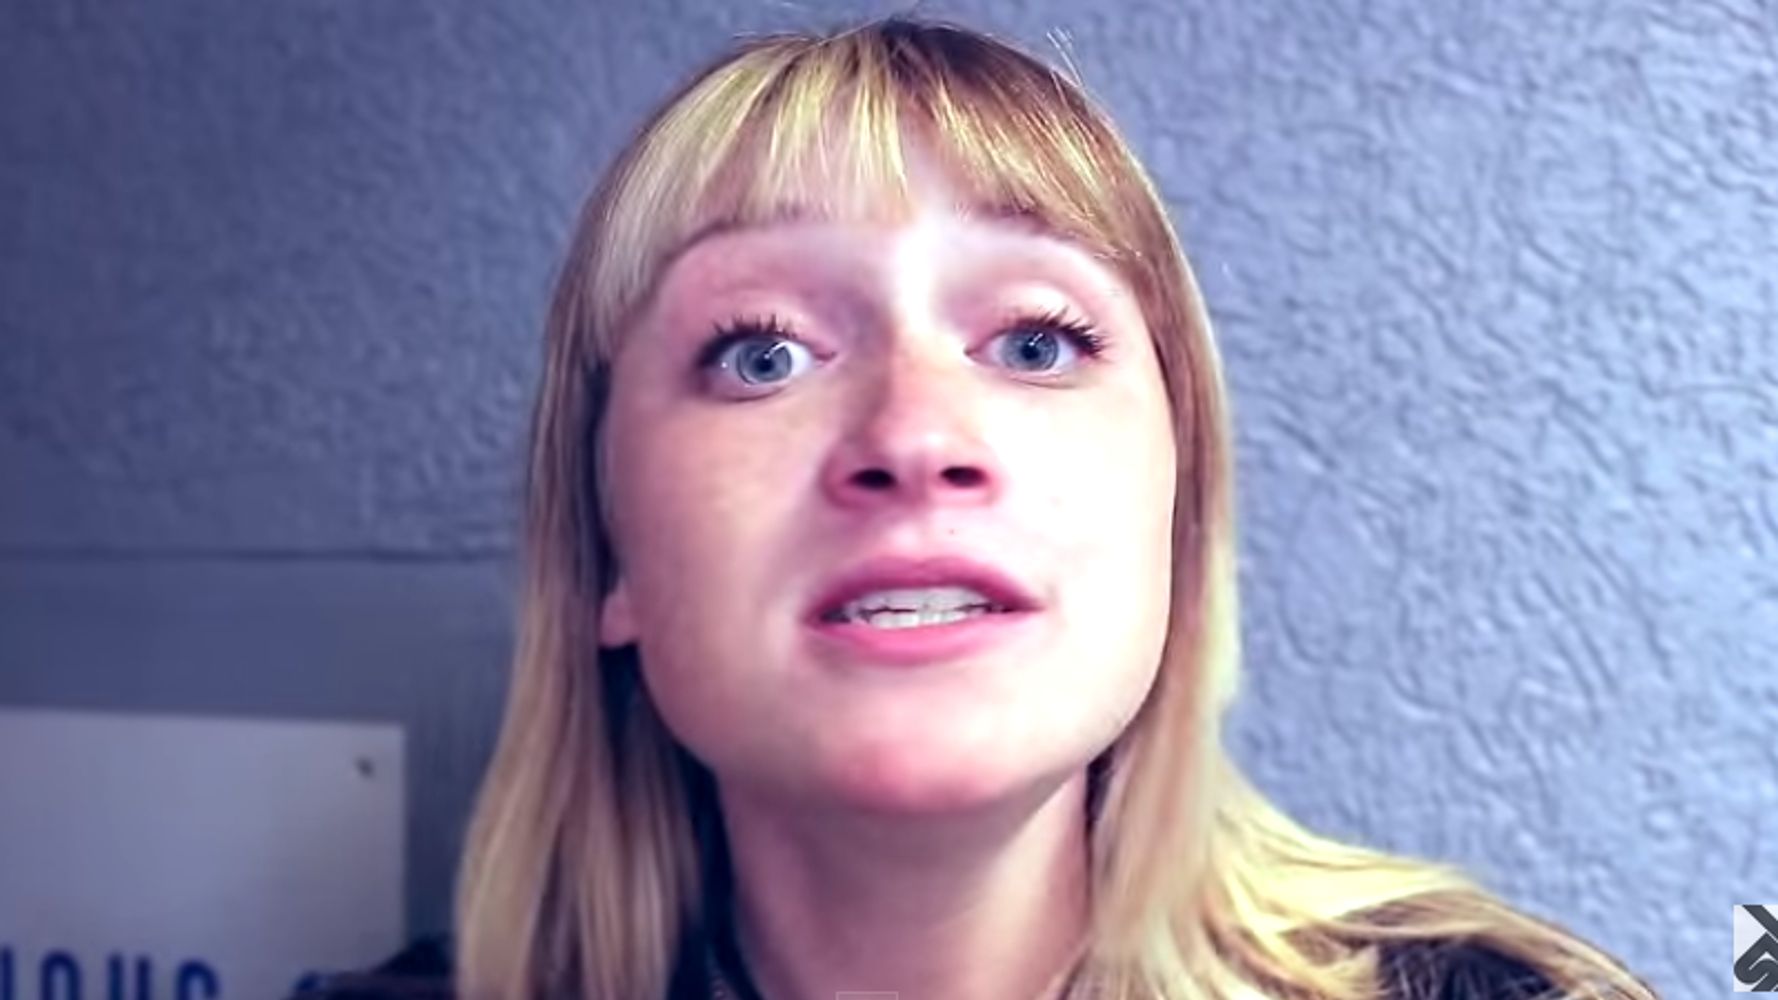 This Woman's Beatboxing Skills Make Jaw Drop | HuffPost Communities